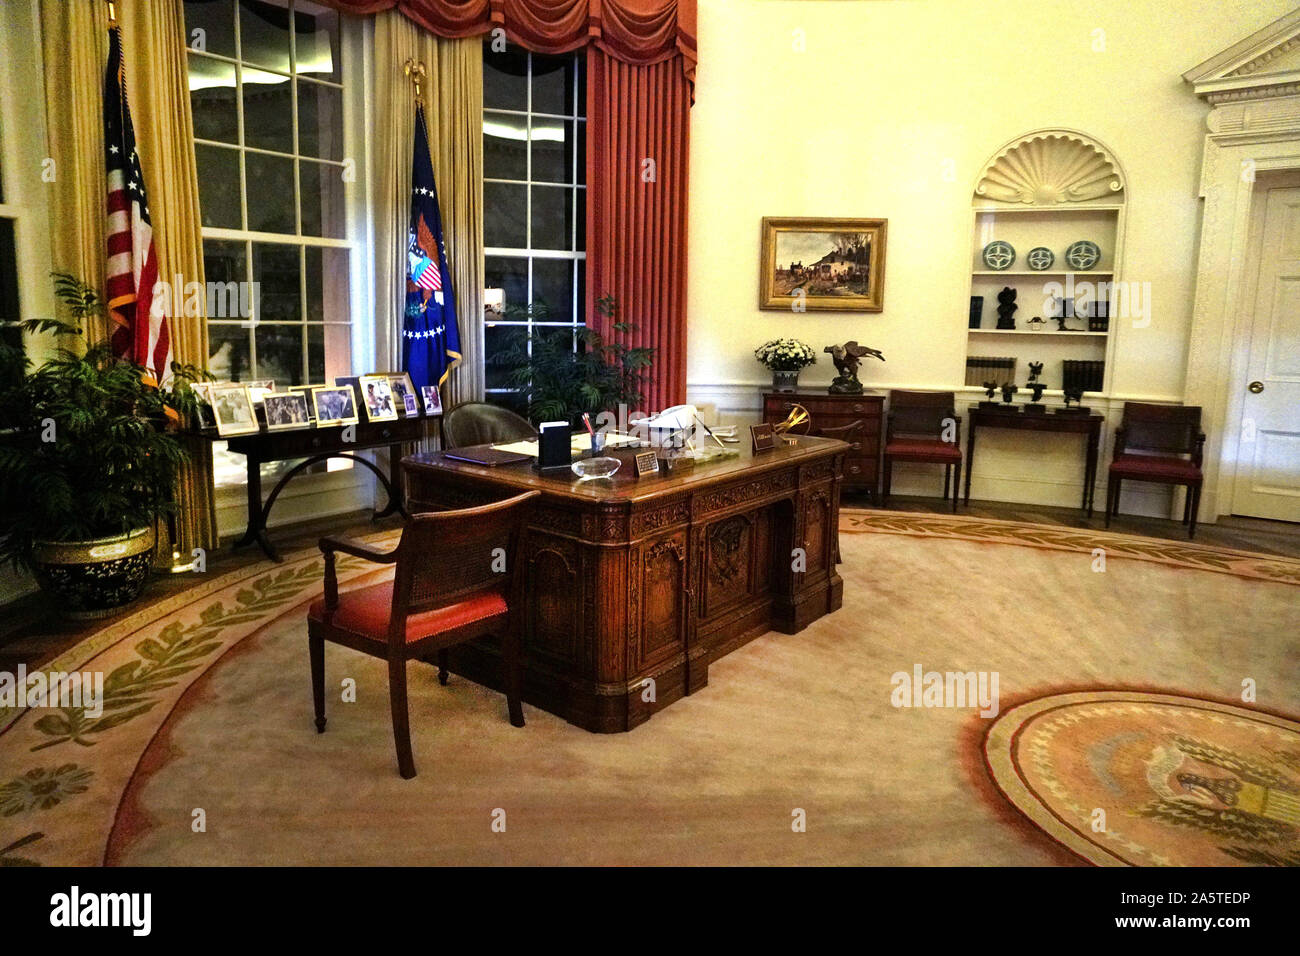 The Oval Office replica in the Ronald Reagan Presidential Library in Simi Valley California.  Photo by Dennis Brack Stock Photo